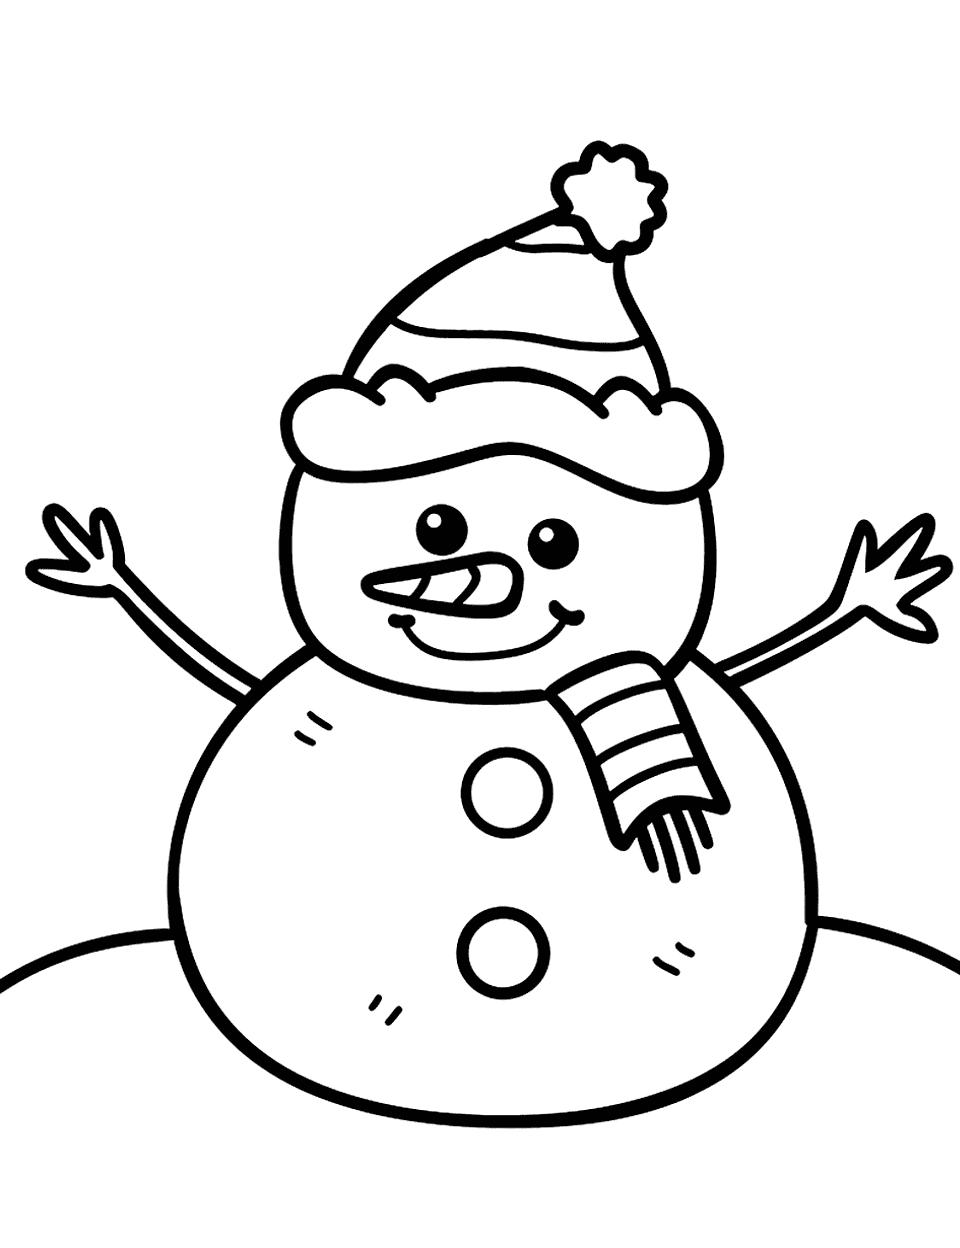 Winter Snowman Toddler Coloring Page - A simple-looking snowman out in the snow.